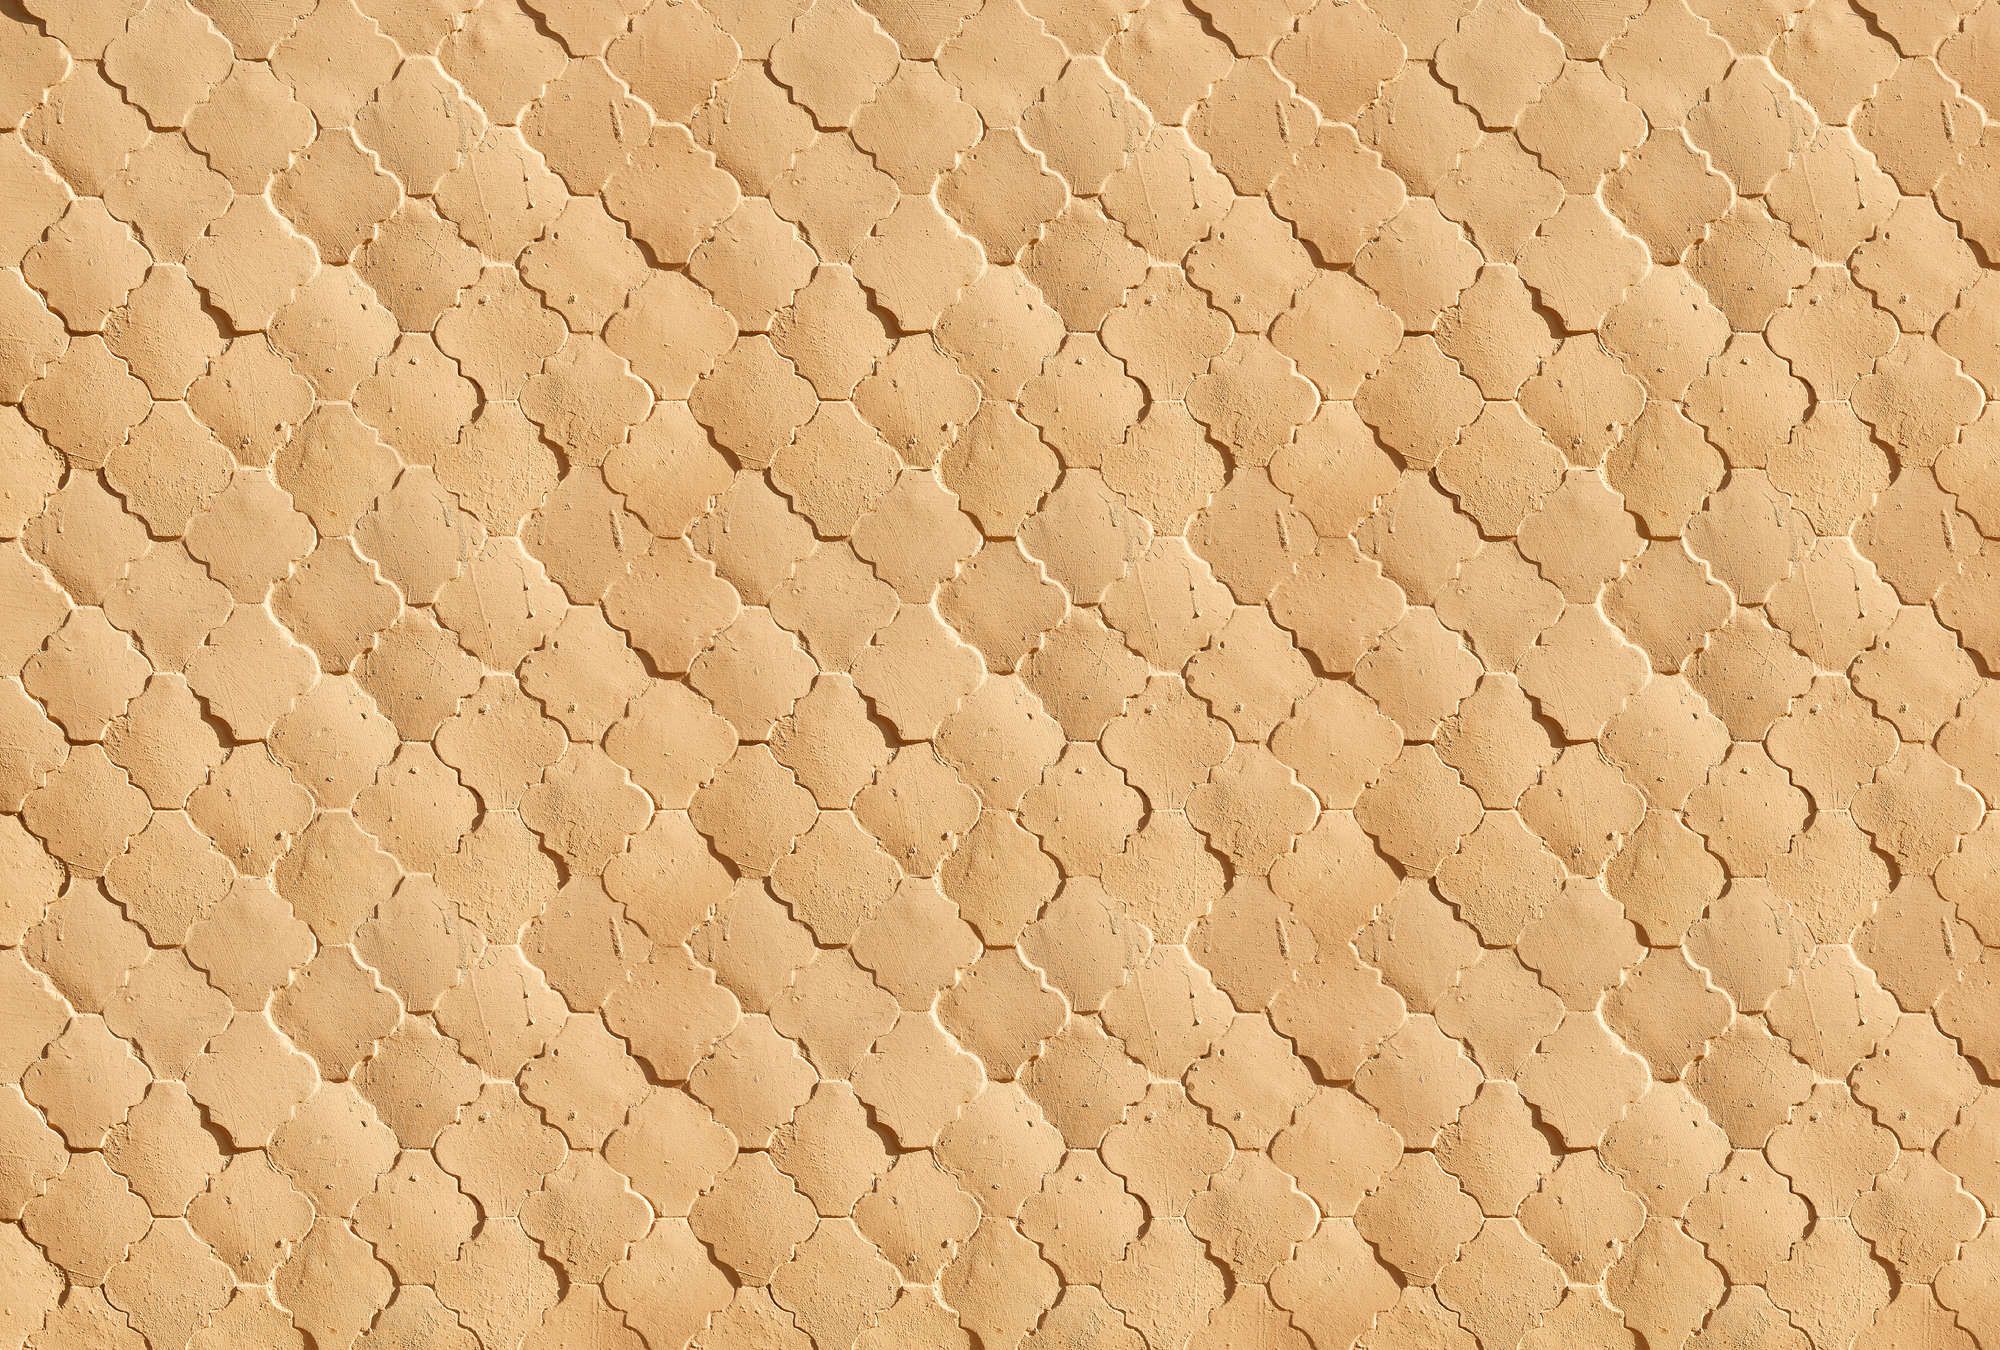             Photo wallpaper »siena« - Mediterranean tile pattern in sand colours - Lightly textured non-woven fabric
        